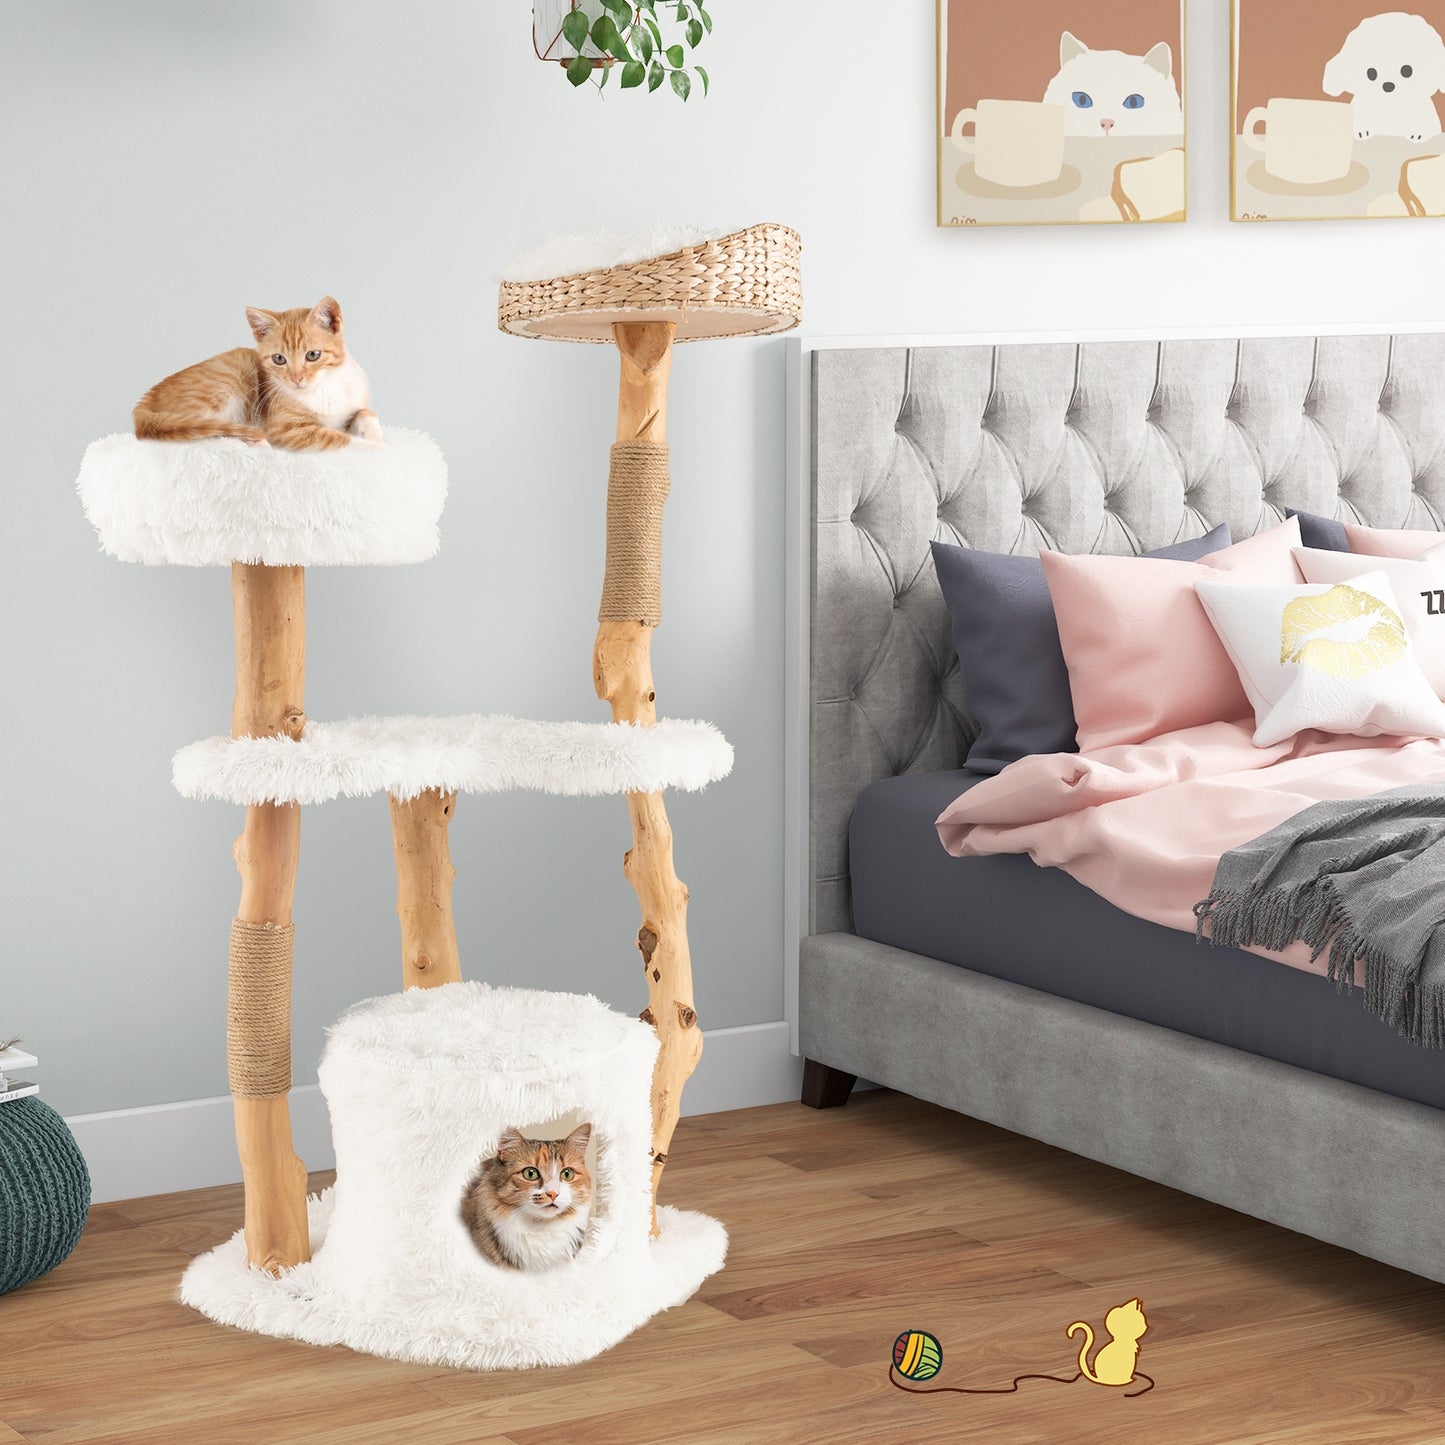 Solid Wood Cat Tower with Top Cattail Basket Cat Bed for Indoor Cats-White